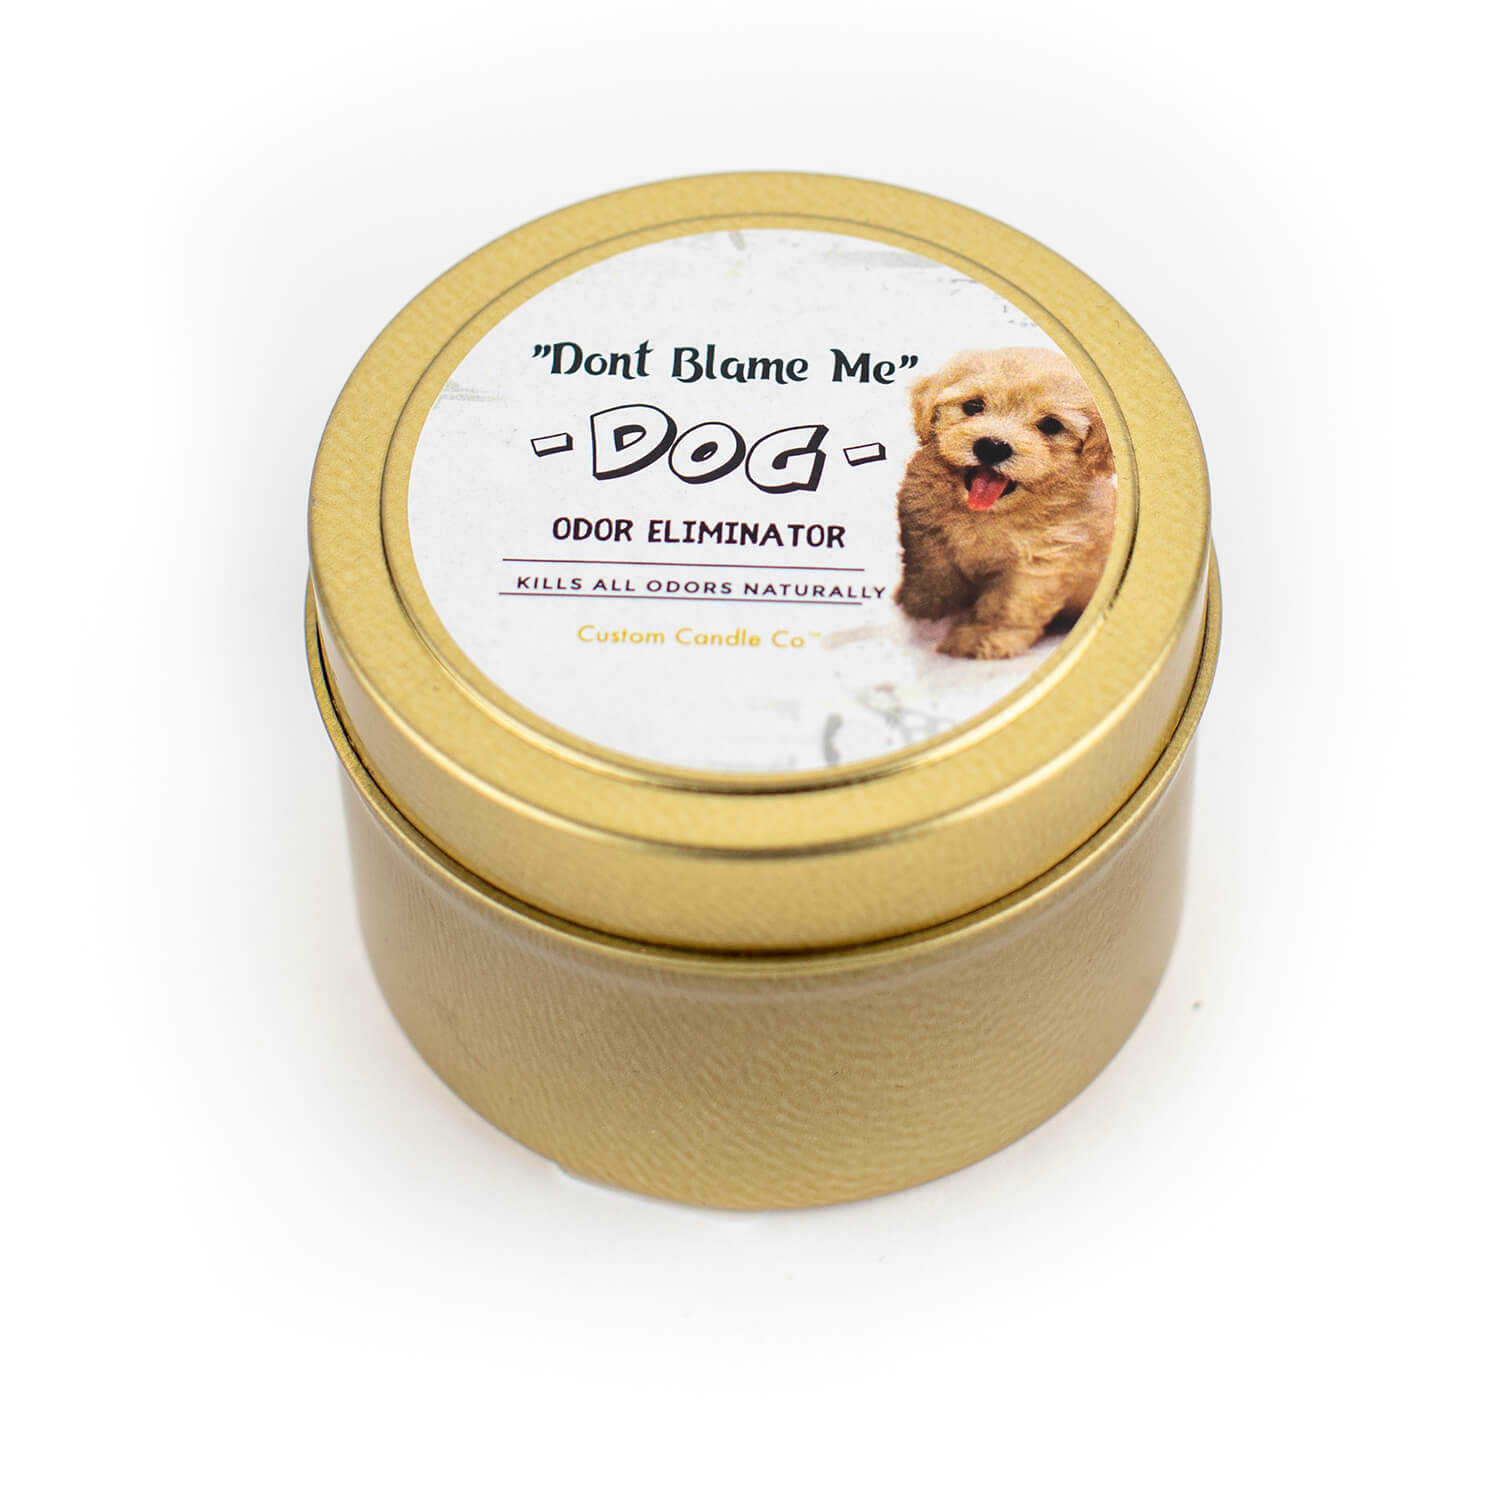 A "Don't Blame Me" Dog Tin Candle Odor Eliminator with the image of dog on it.